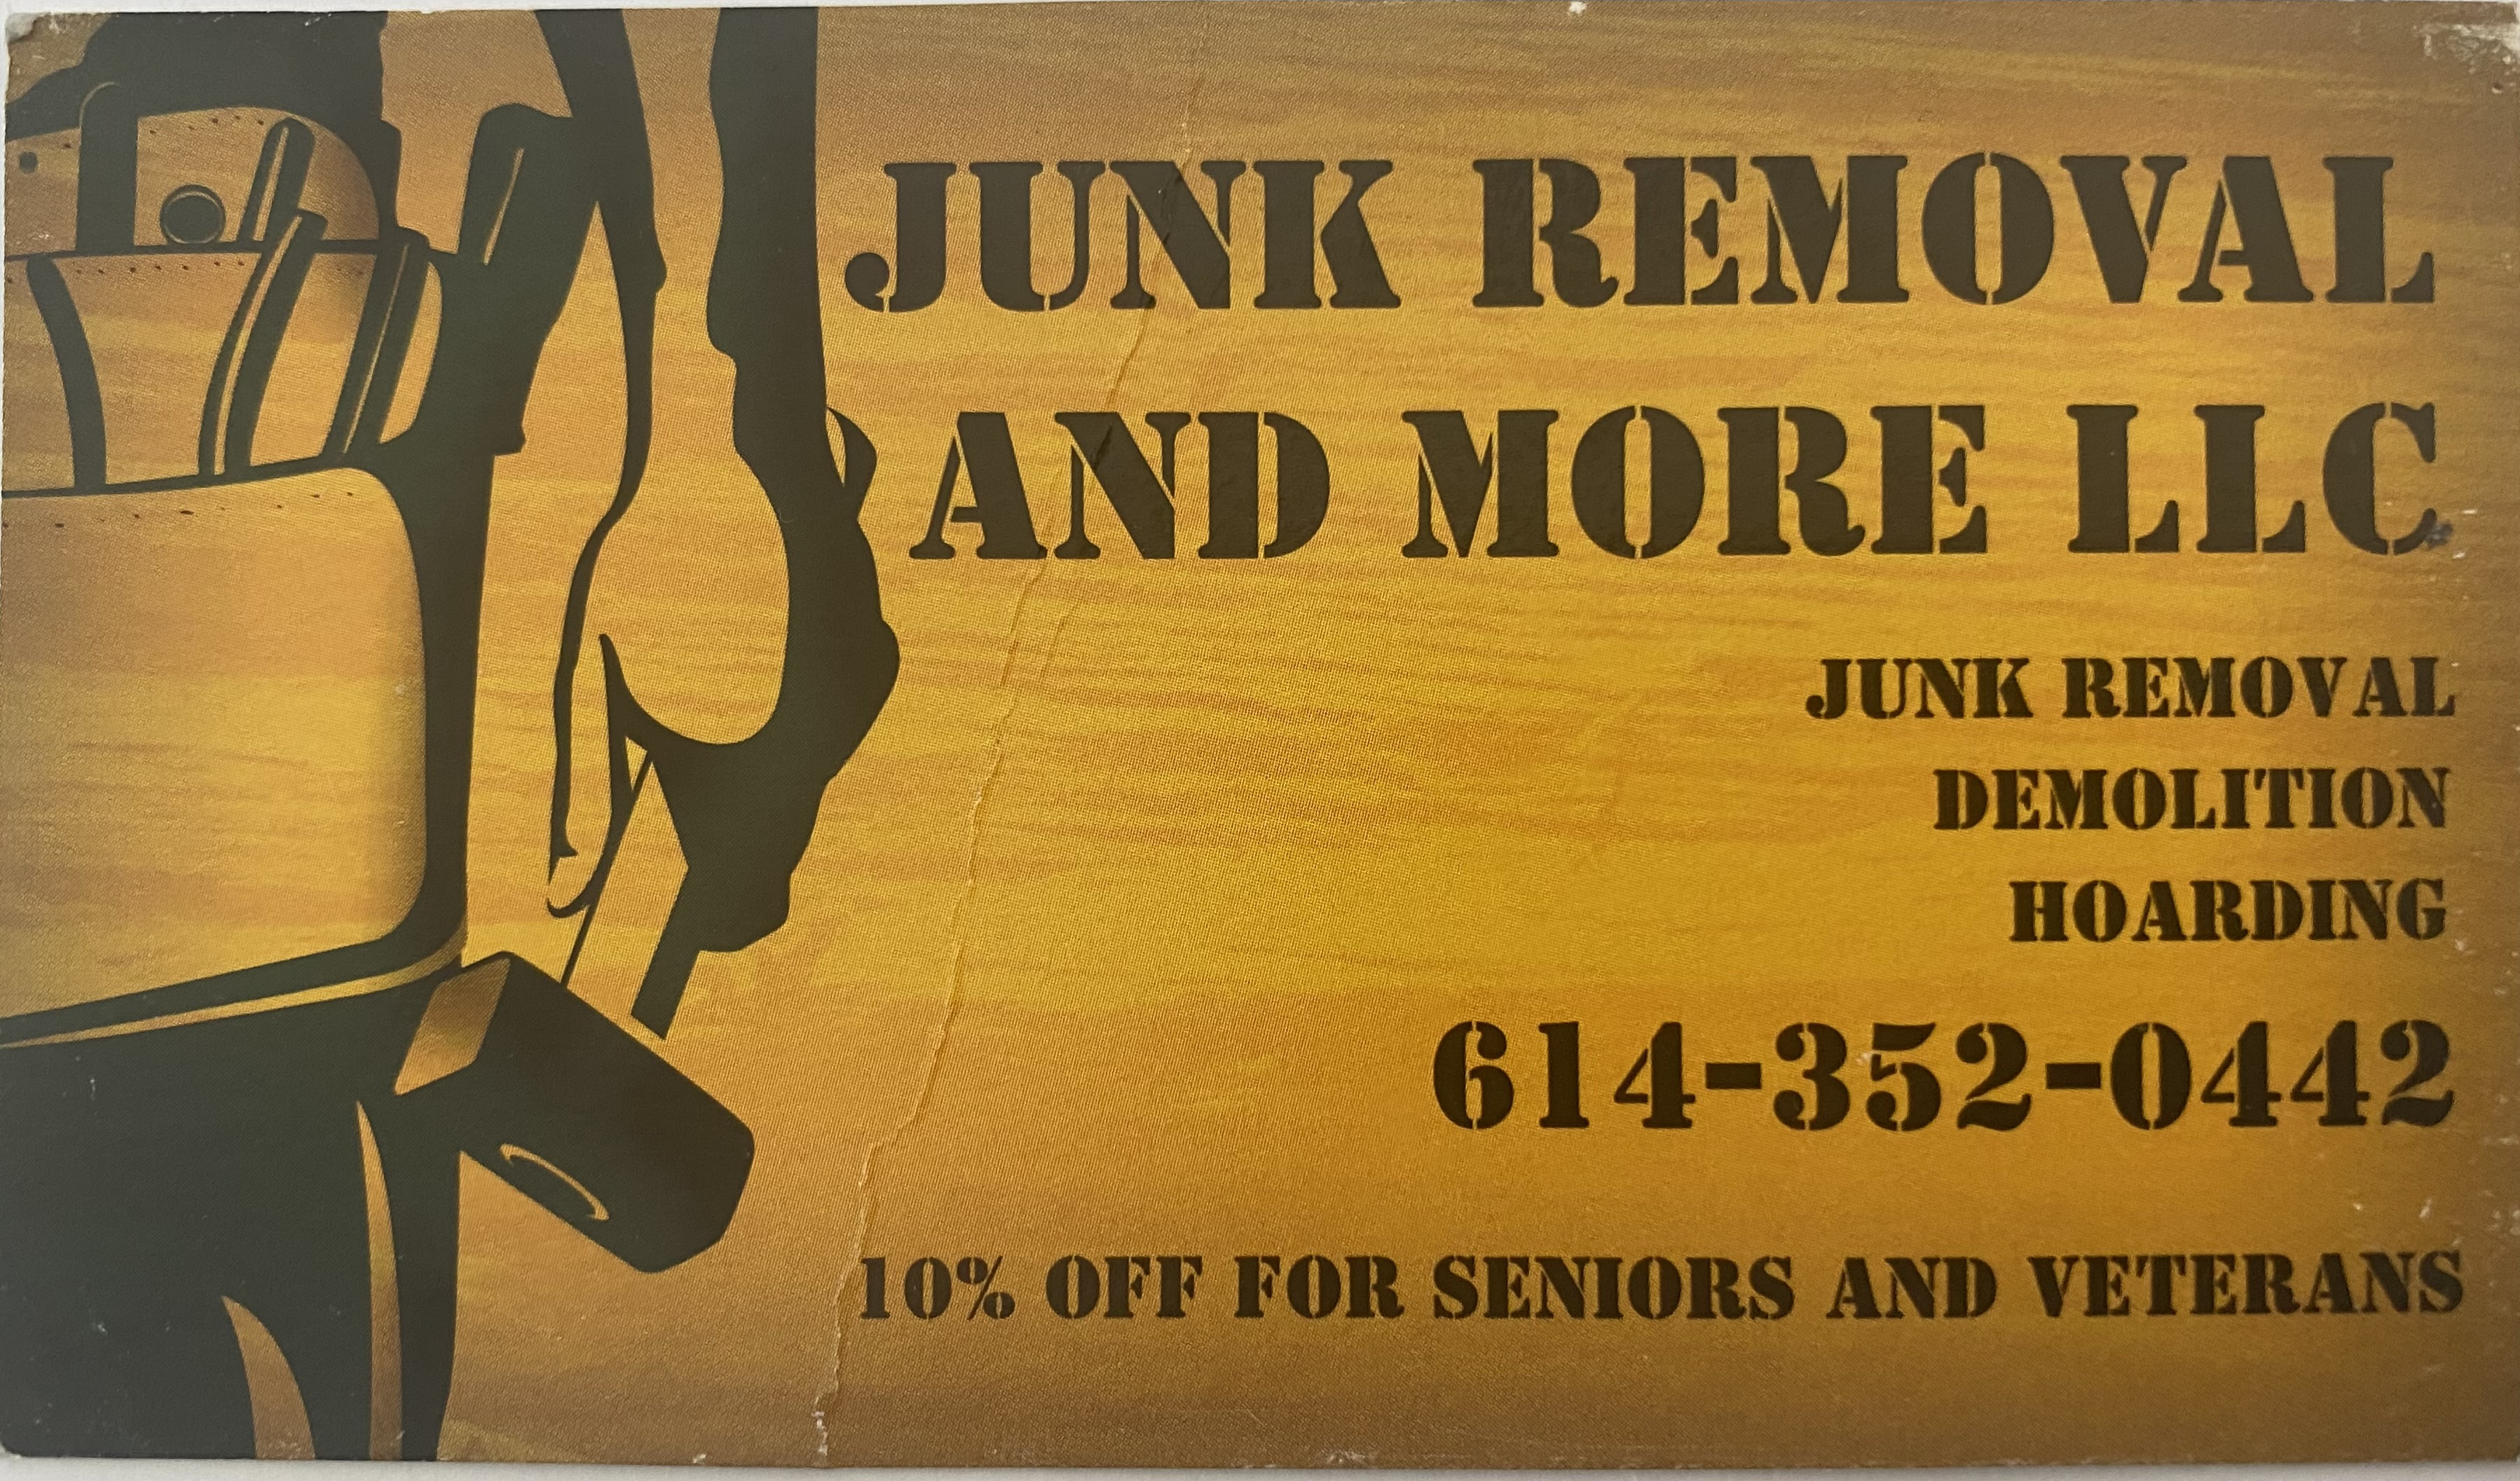 Junk Removal and More LLC